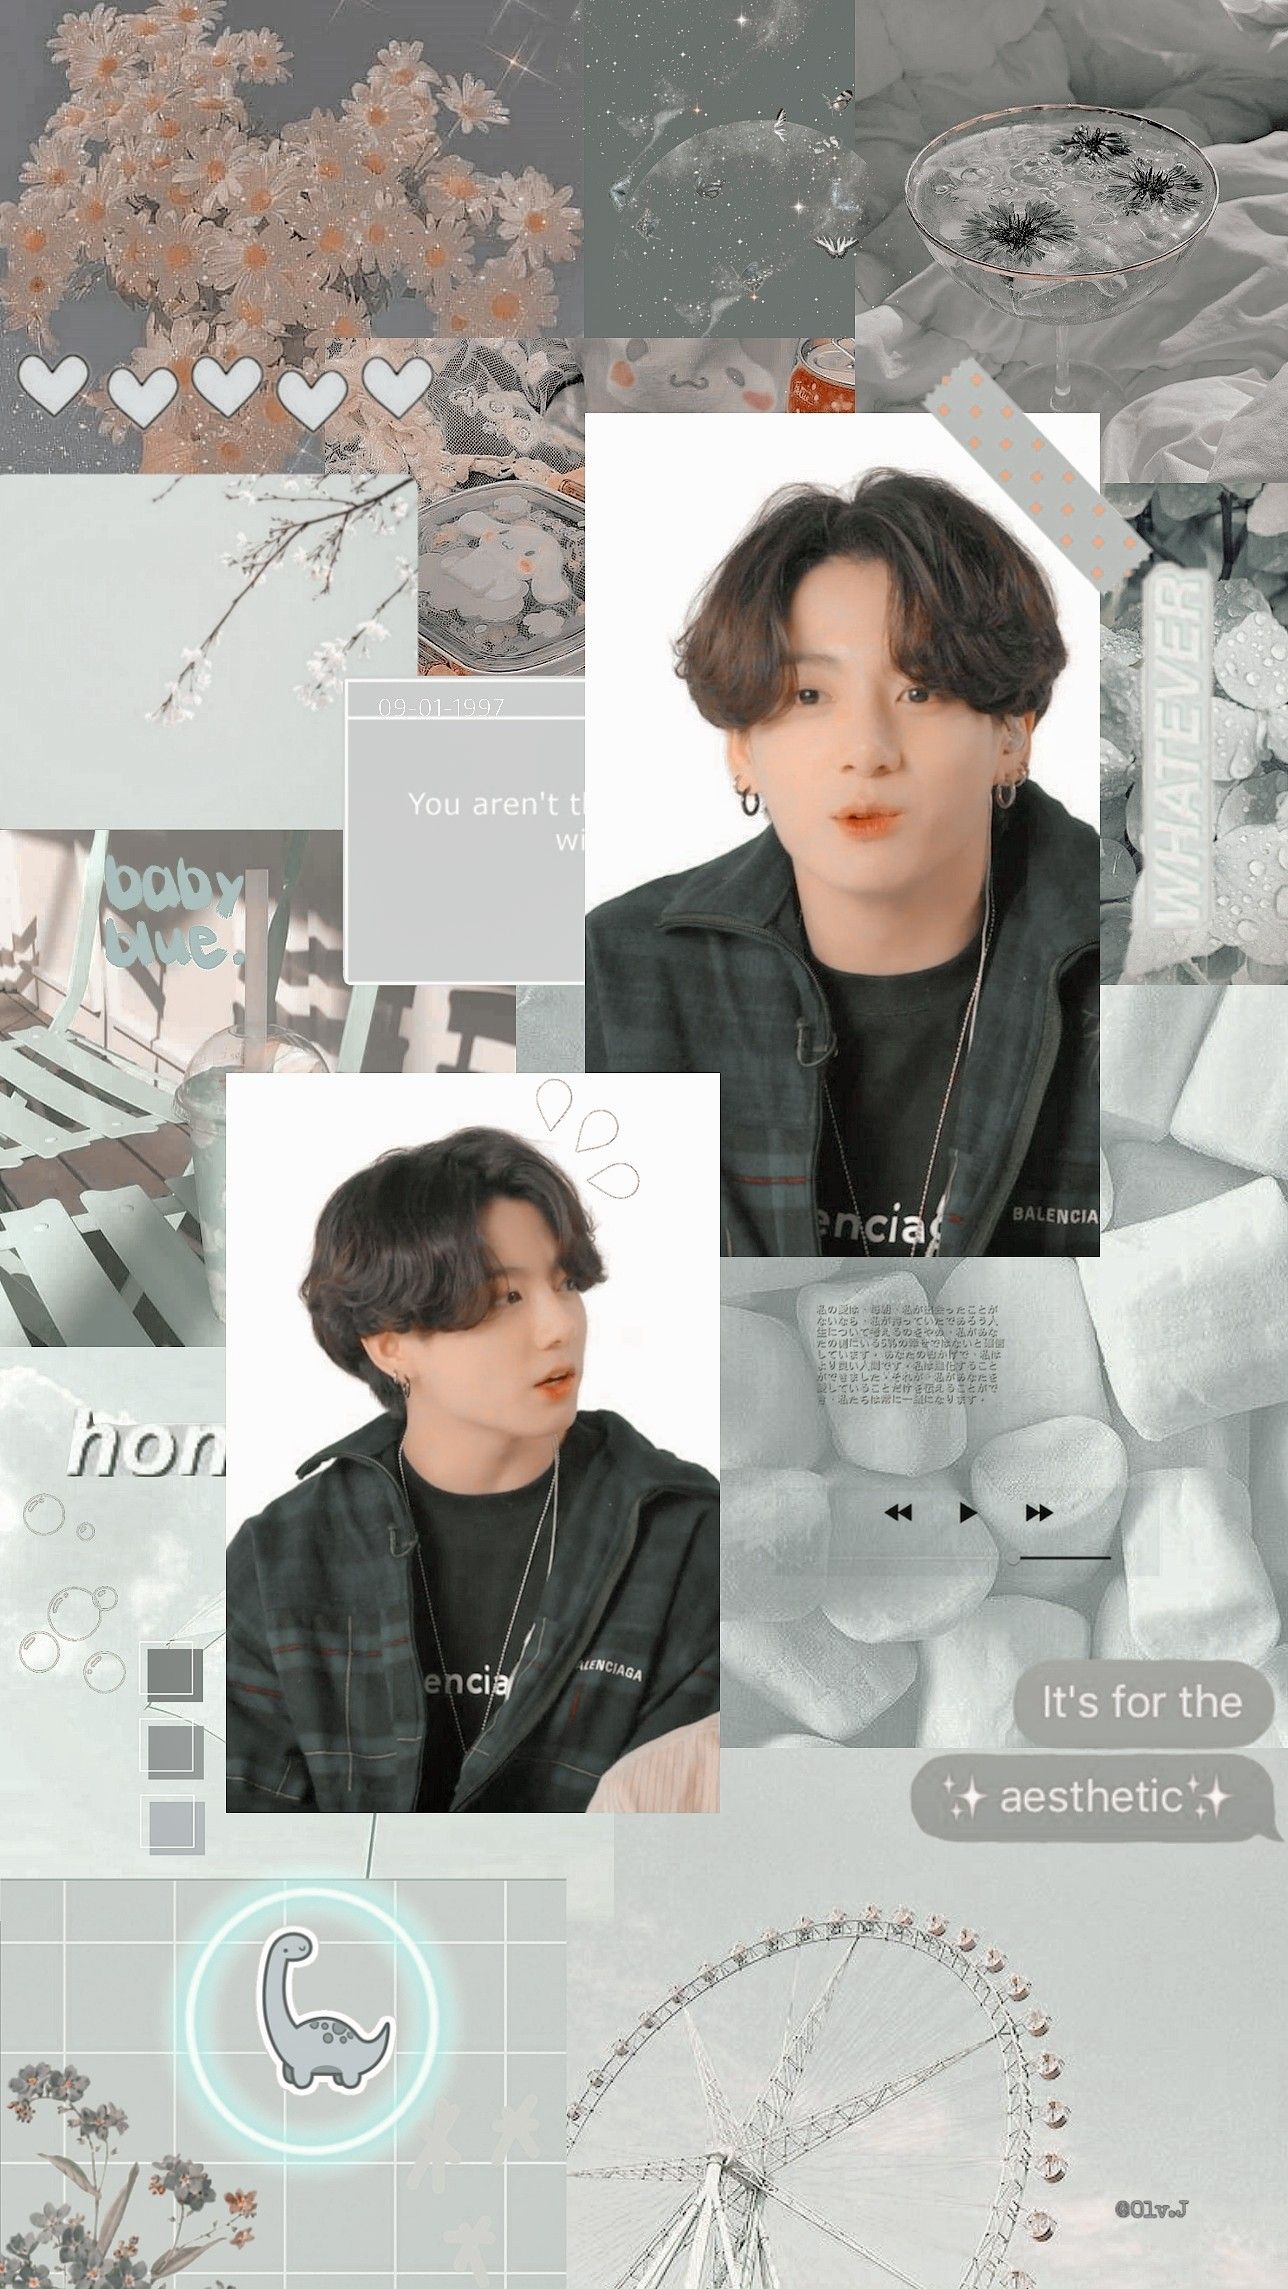 BTS aesthetic wallpaper I made for Suga! (All credit to the rightful owners) - Jungkook